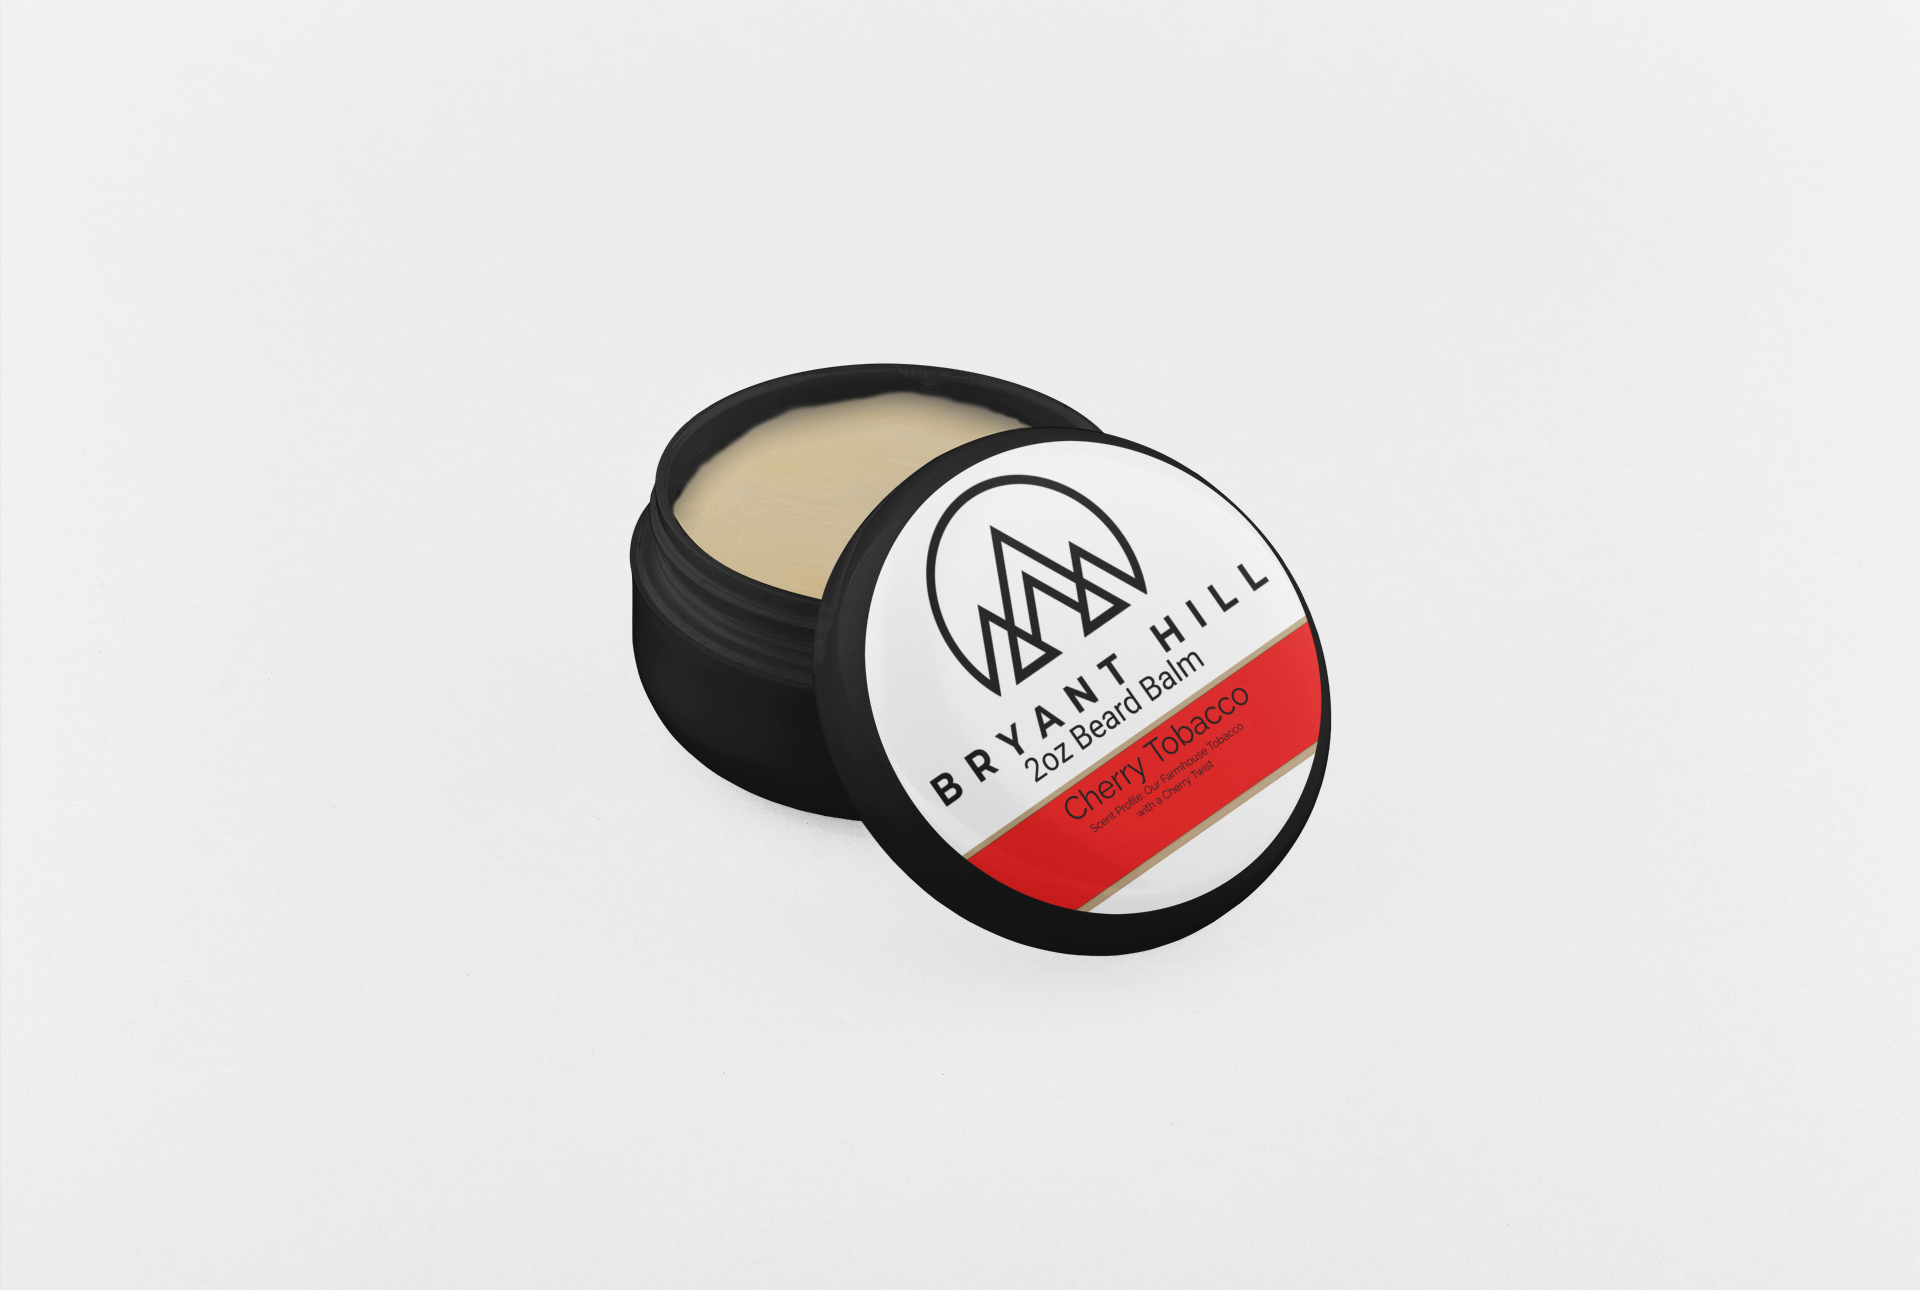 Small Batch Beard Balm: The Perfect Blend of Nourishment and Control